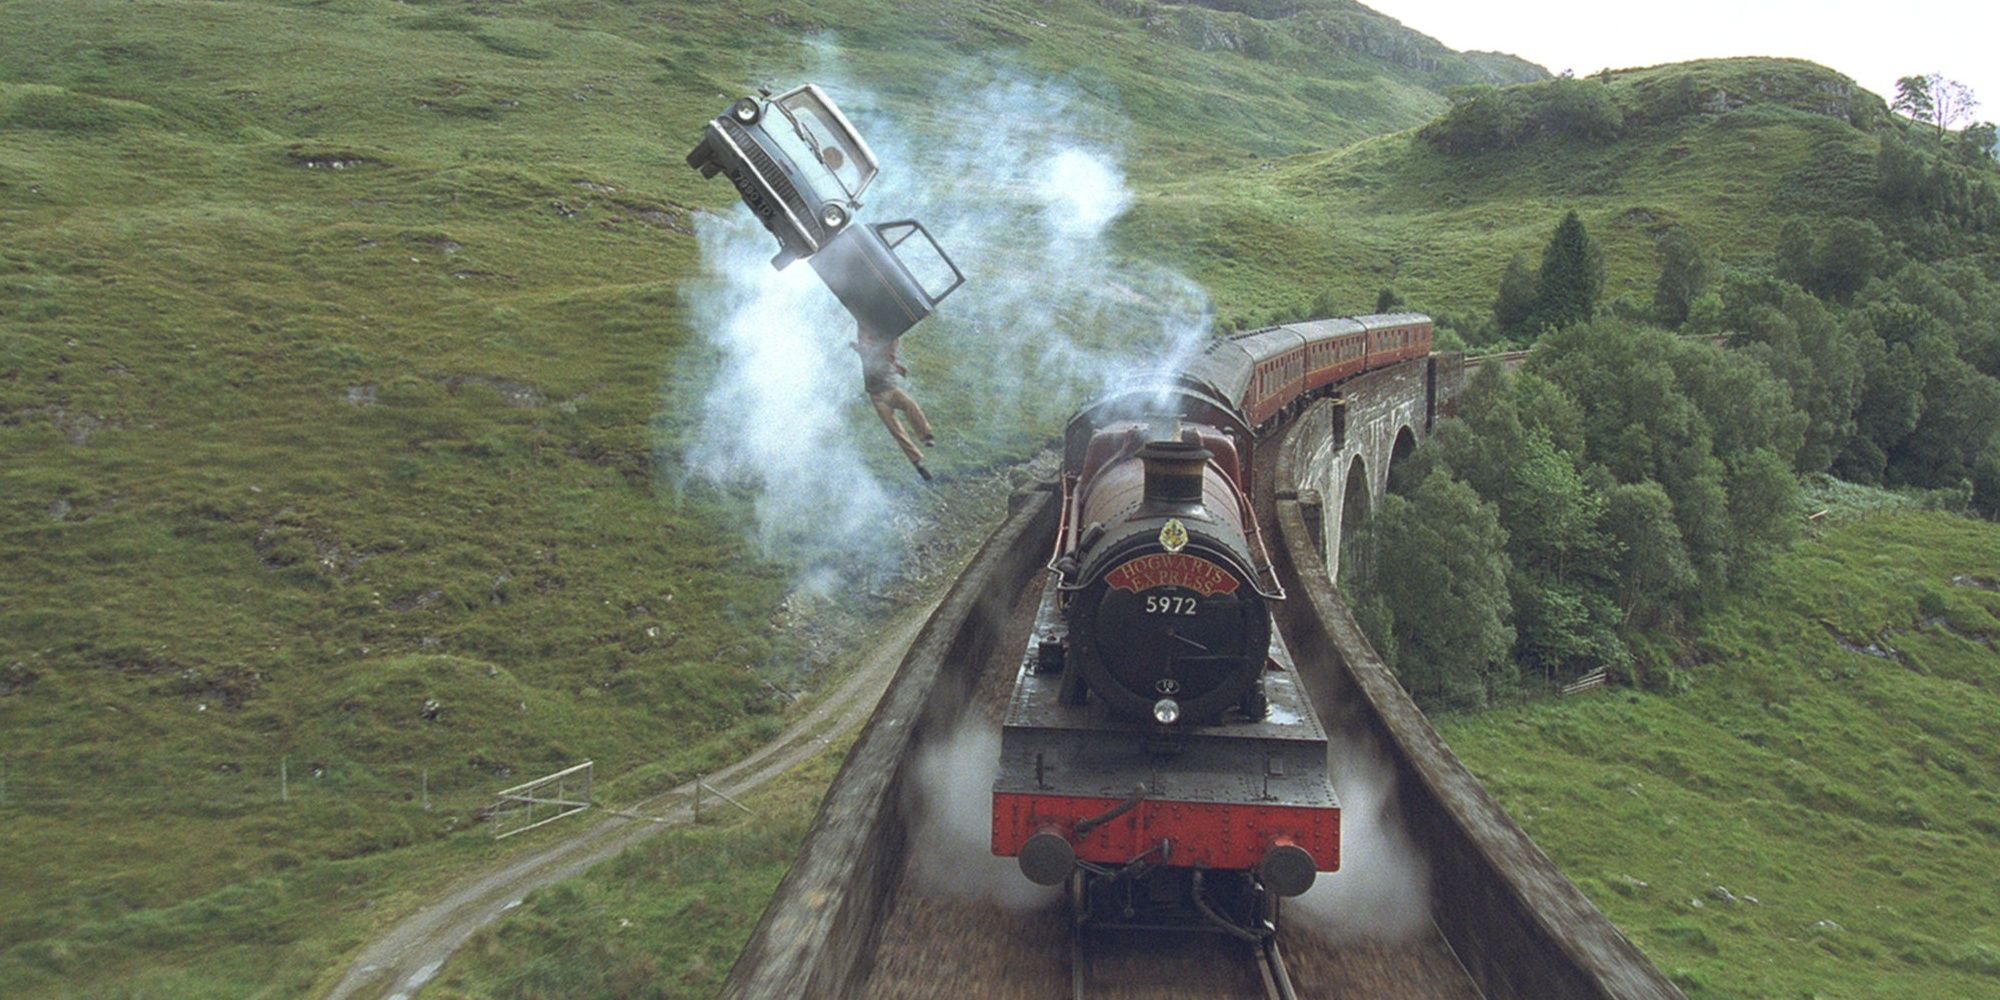 harry potter flying car and train on their way to hogwarts